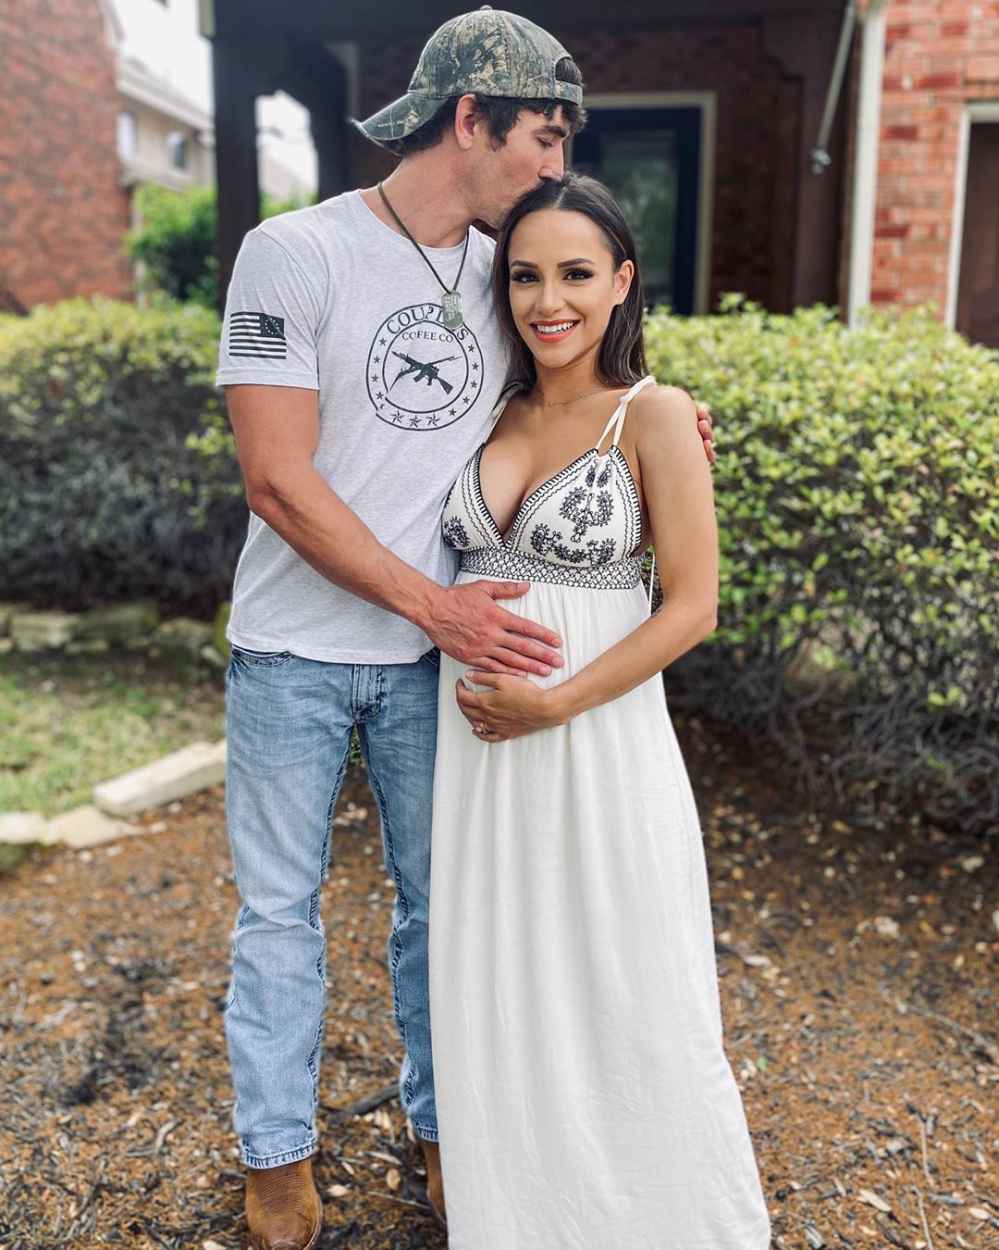 Big Brother Jessica Graf and Cody Nickson Reveal Sex of Baby Number 2